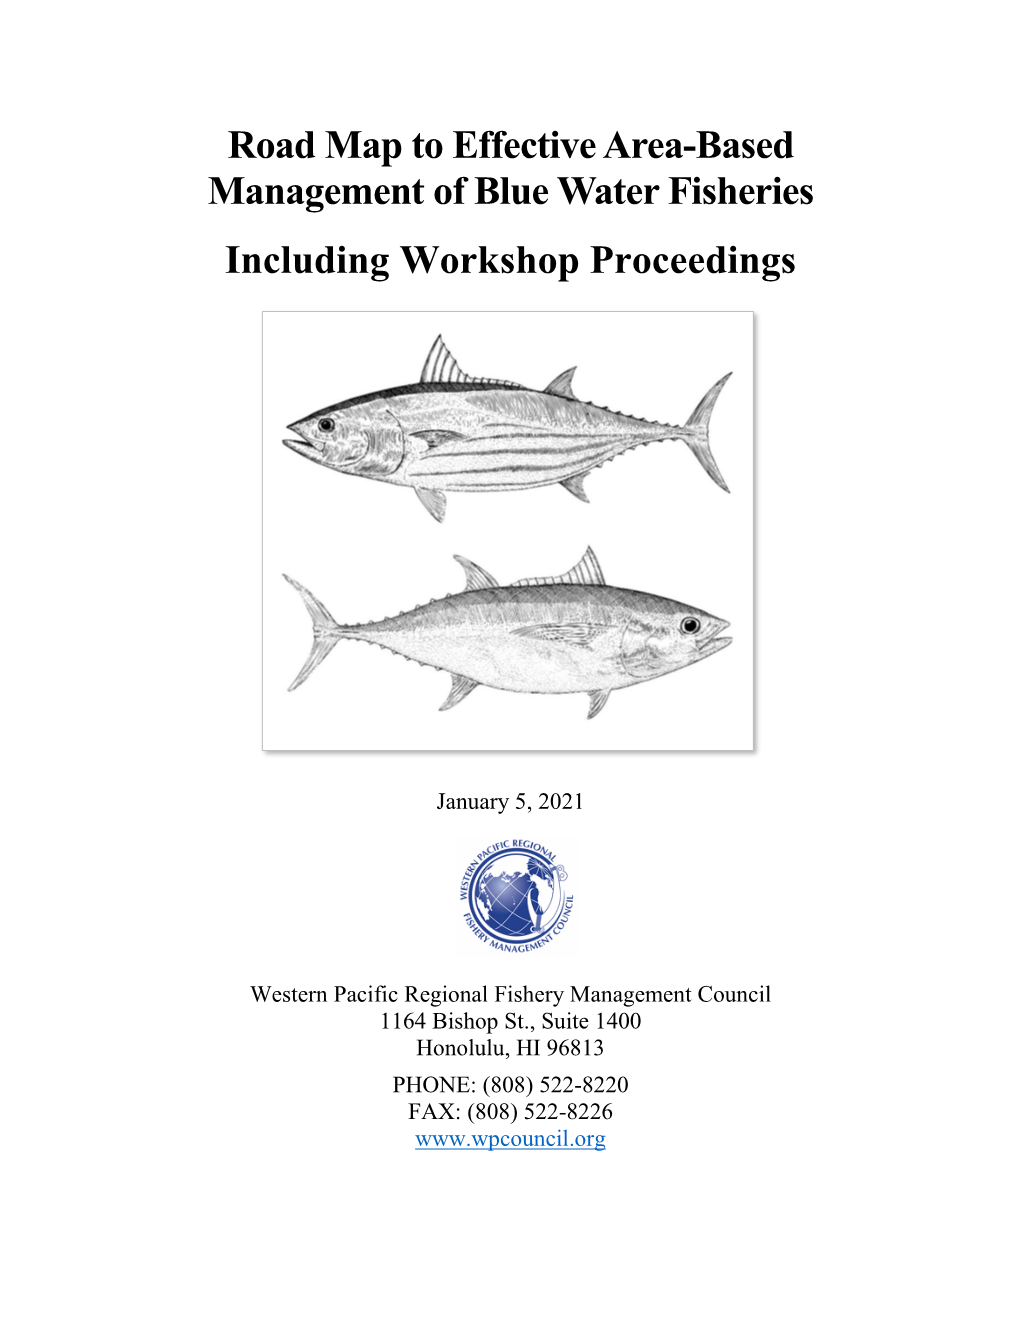 Road Map to Effective Area-Based Management of Blue Water Fisheries